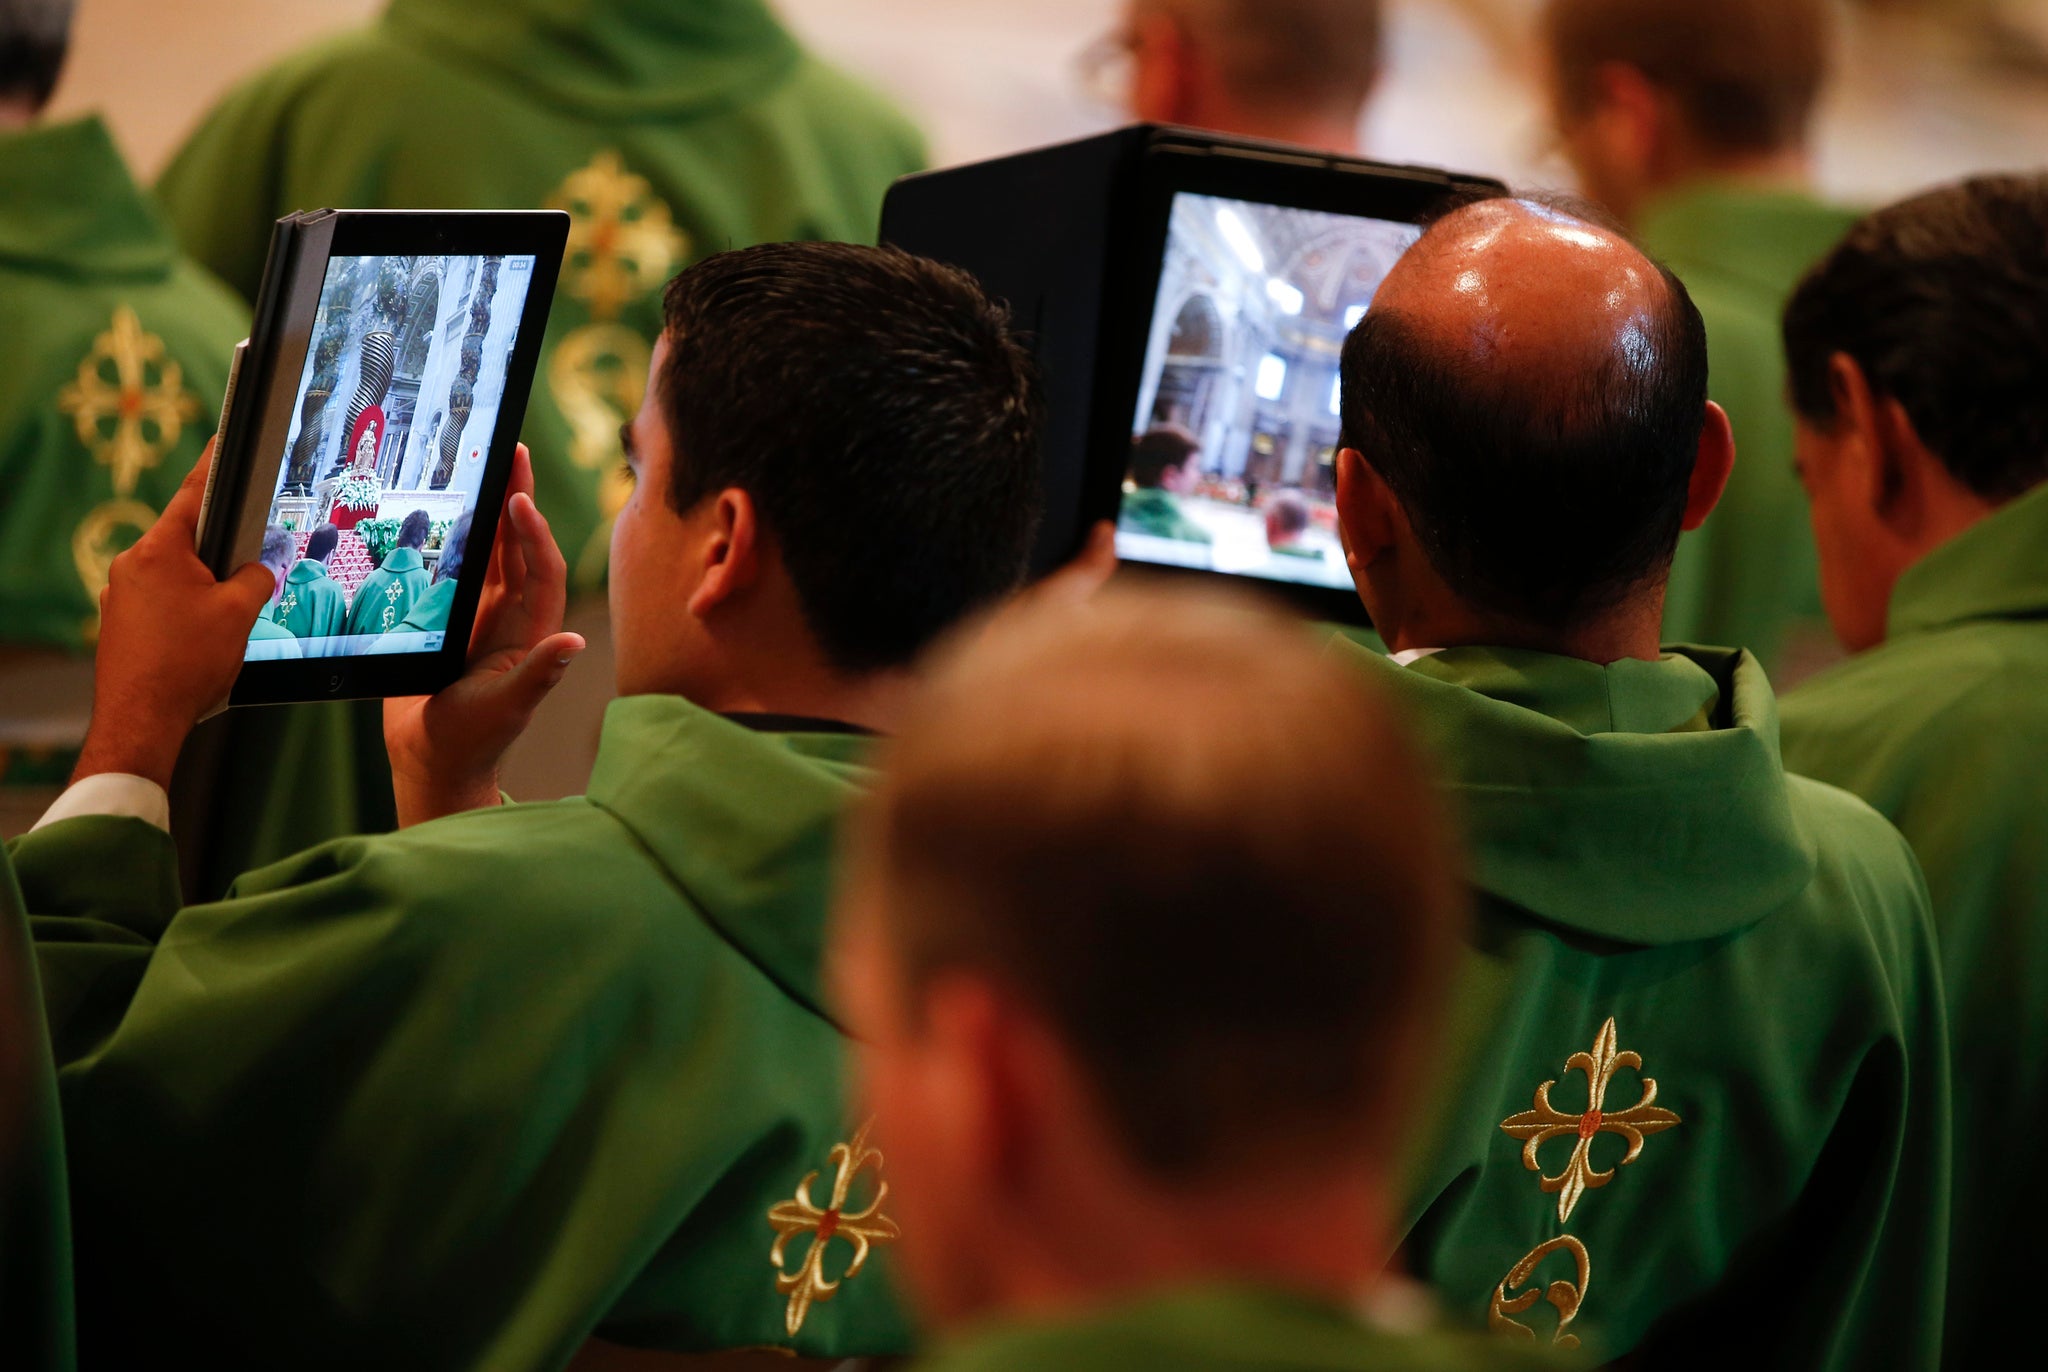 Priests take pictures with tablets as Pope Francis leads a mass in Saint Peter's Basilica at the Vatican July 7, 2013.